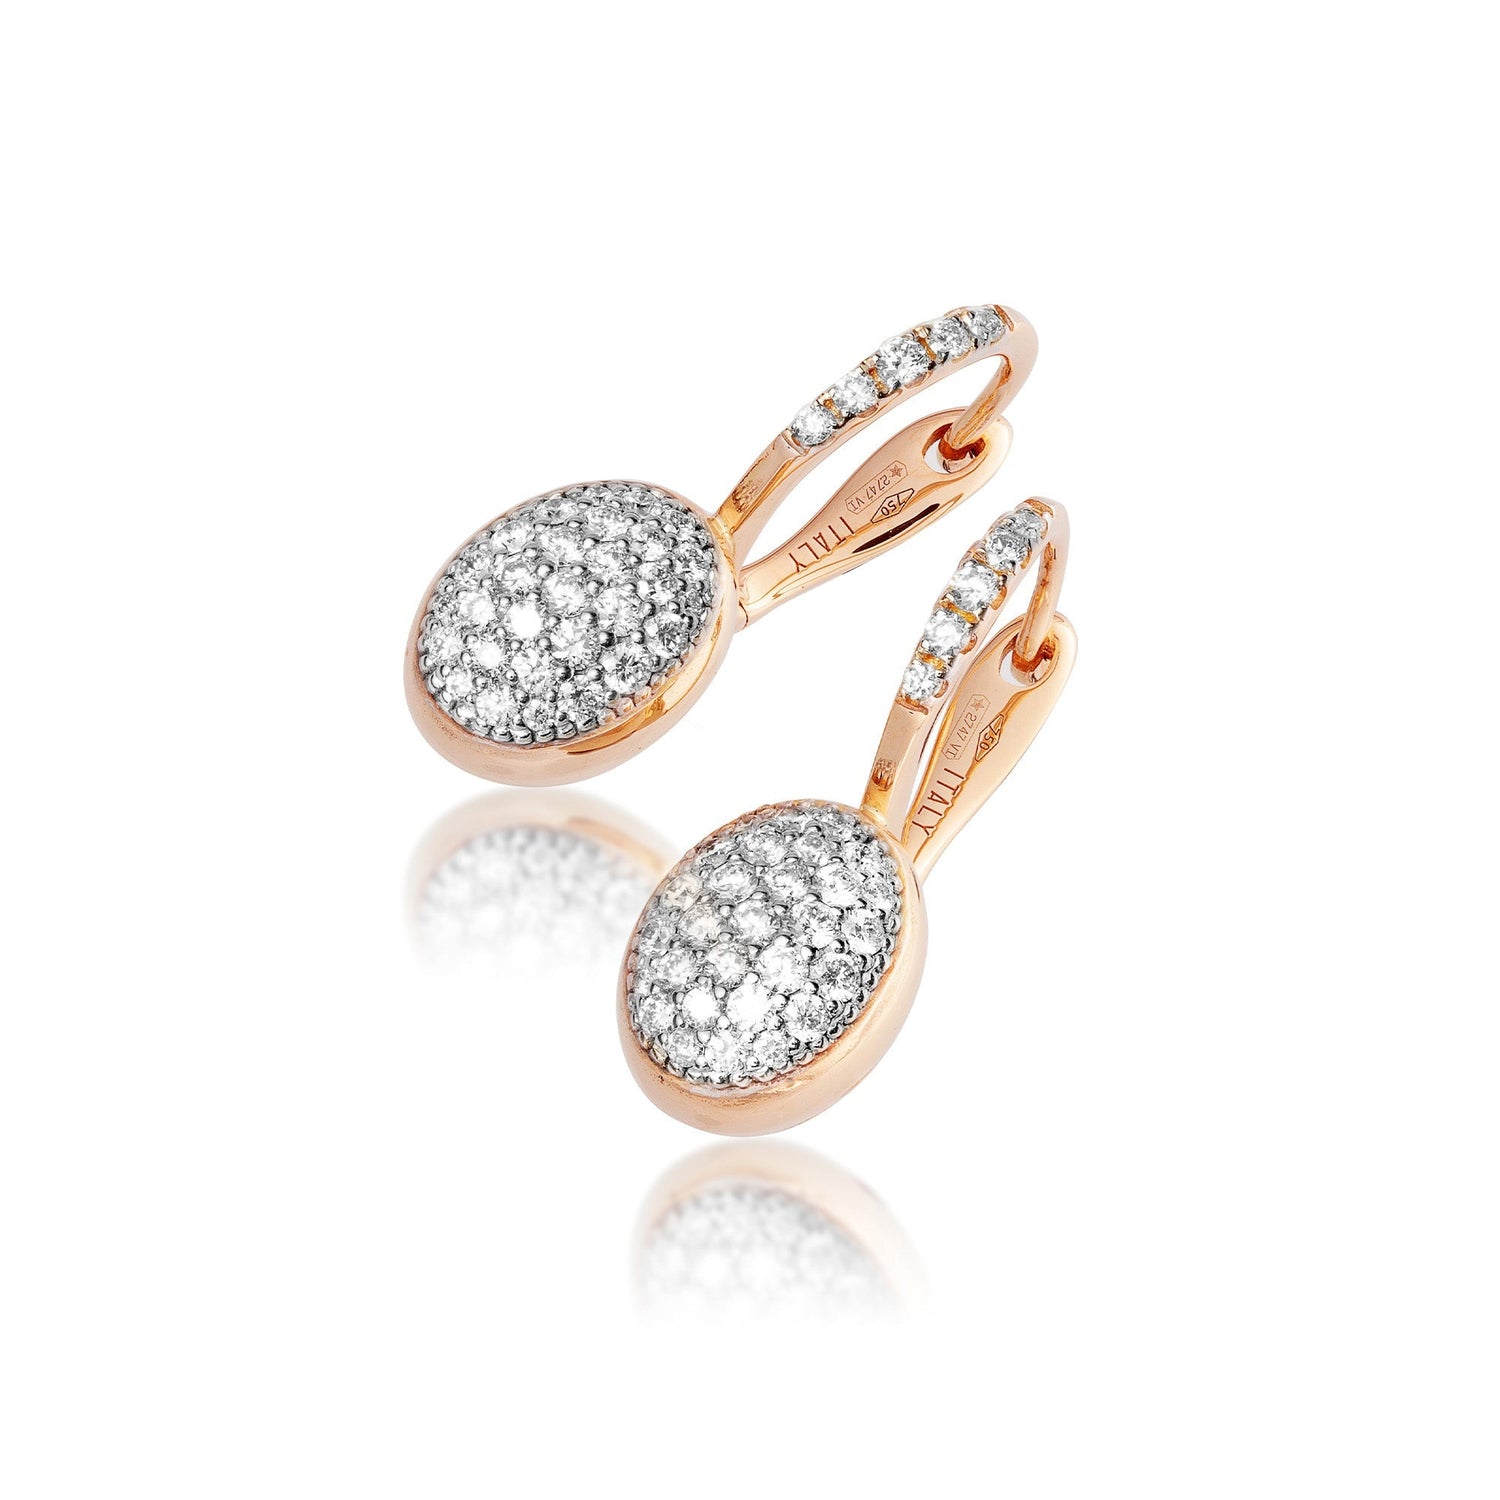 SUNSET "CILIEGINE" ROSE GOLD BOULES AND DIAMONDS (SMALL)